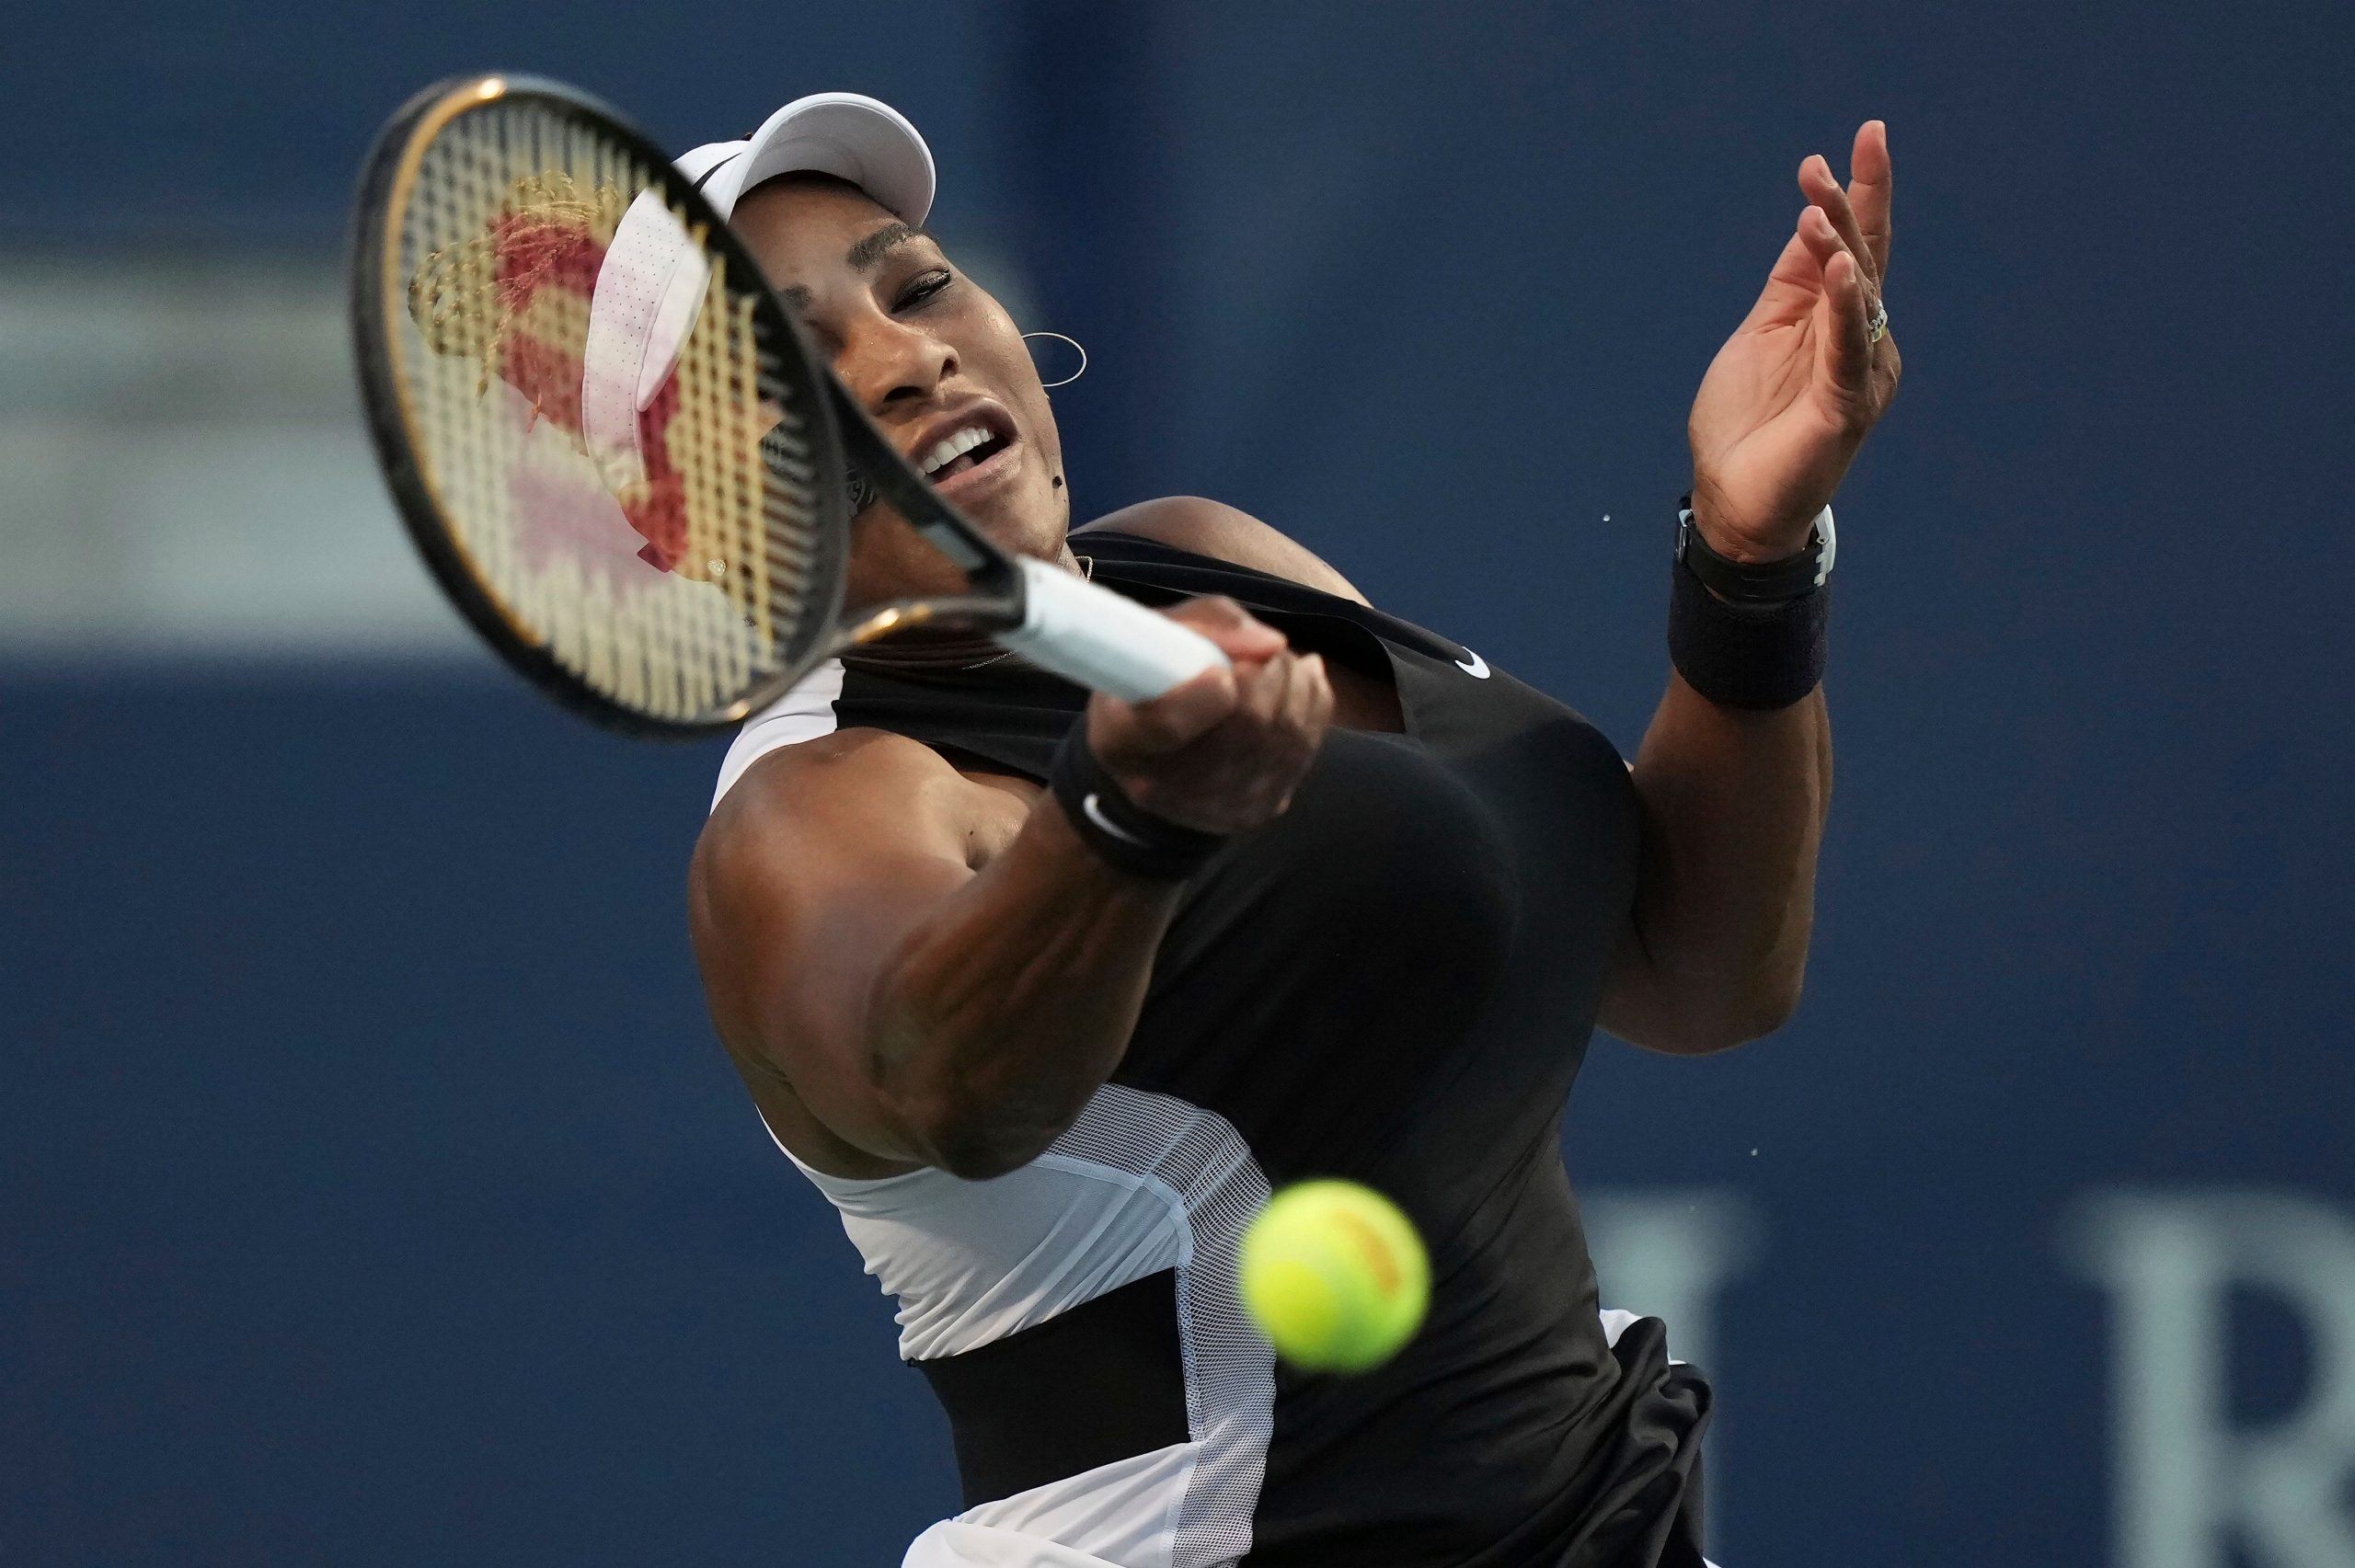 US Open day 5: Serena Williams eyes final 16 spot